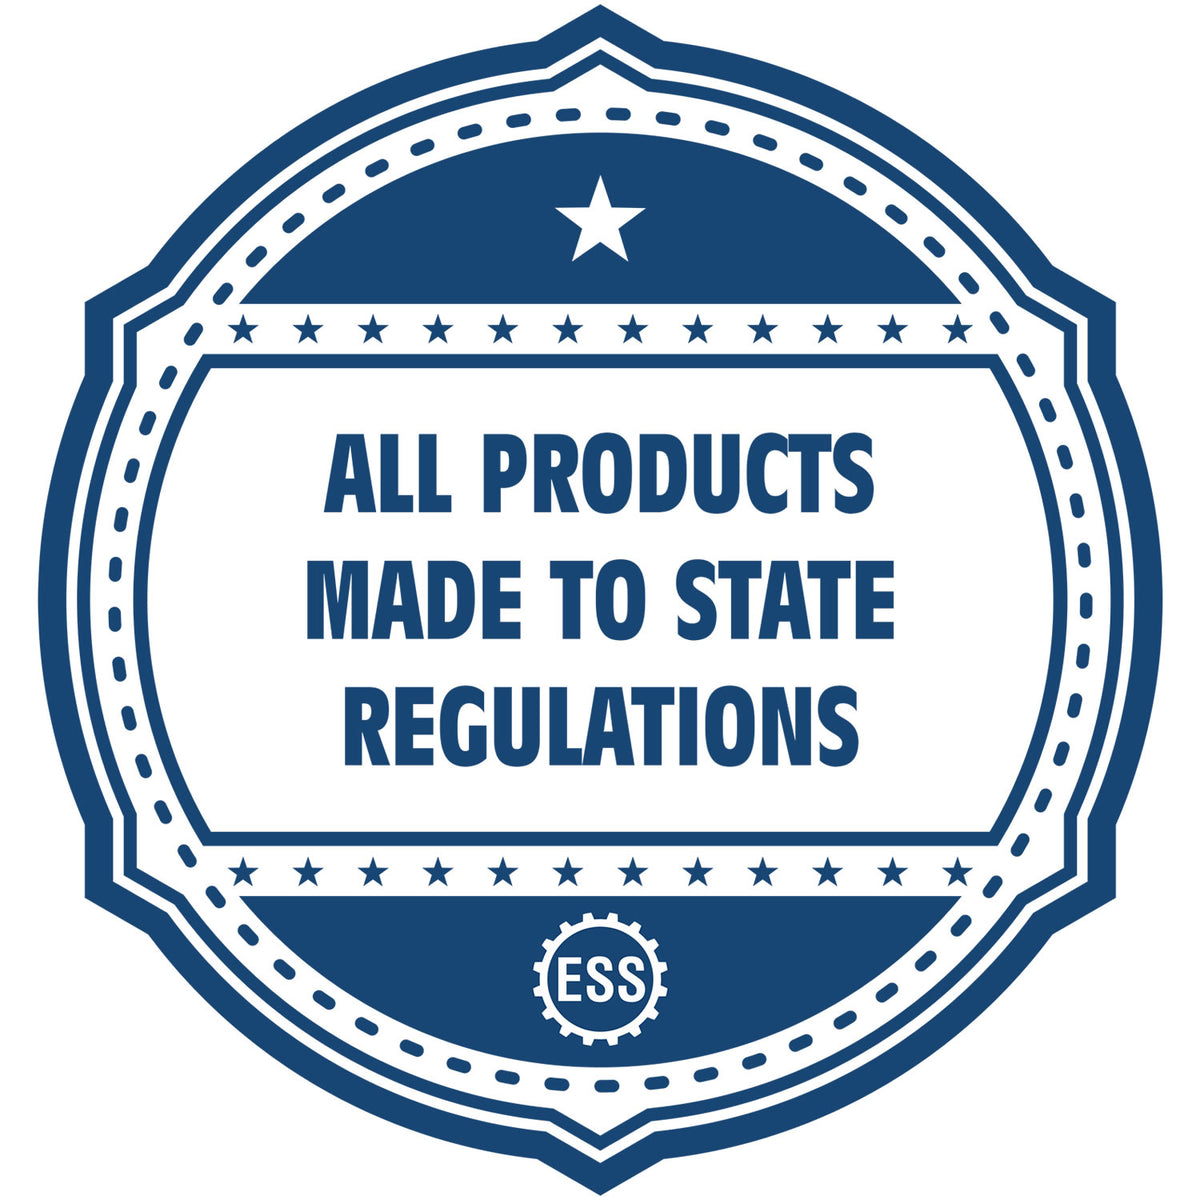 A blue icon or badge for the Soft Georgia Professional Geologist Seal showing that this product is made in compliance with state regulations.